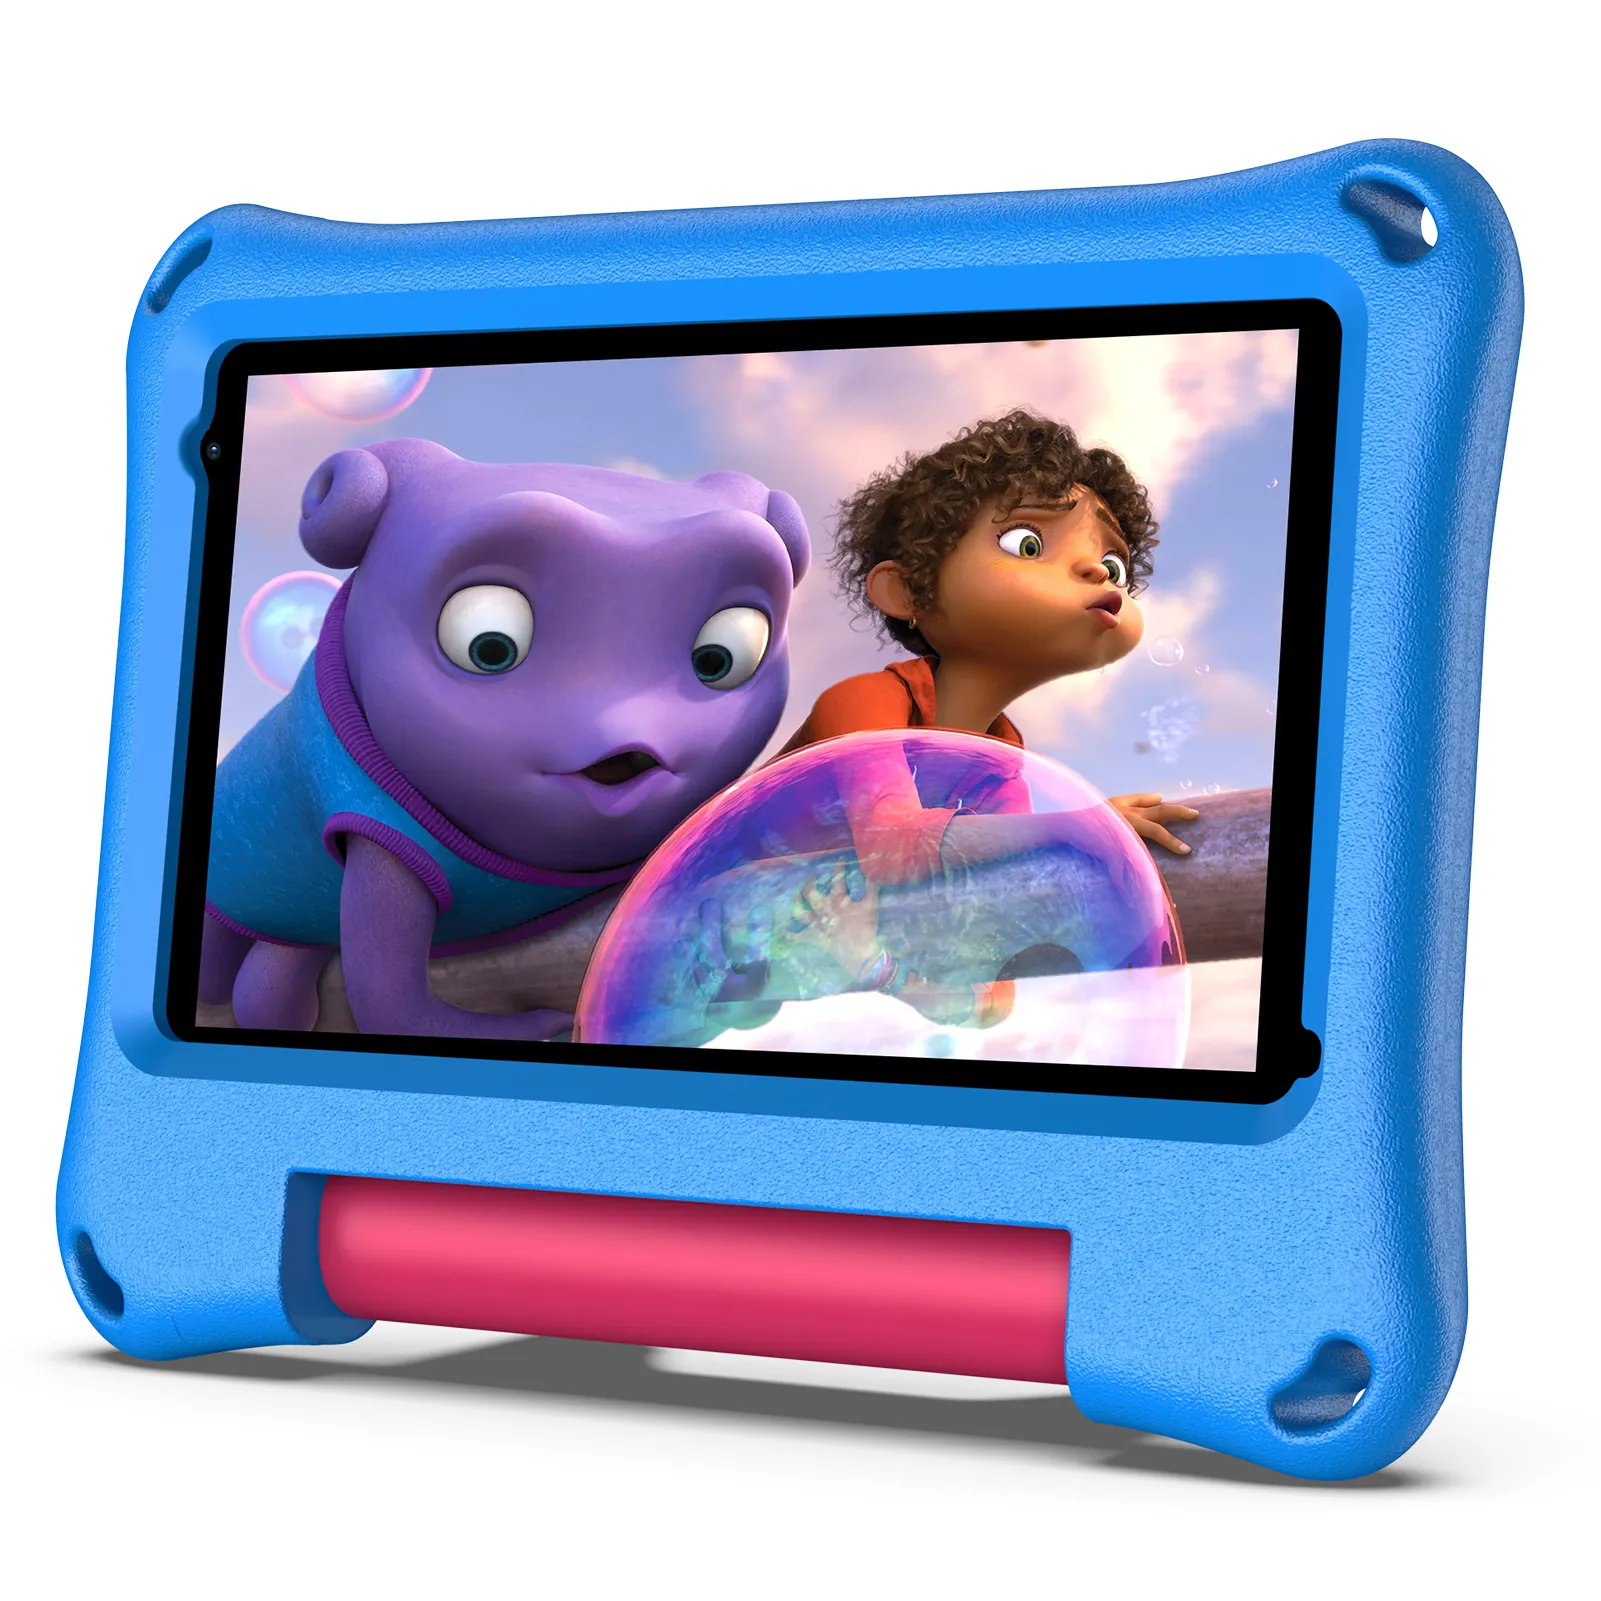 M7K 7"1024*600 IPS 7 Inch Kids Tablet PC A100 Quad Core 2GB RAM+32GB ROM 2/2MP Camera Android System